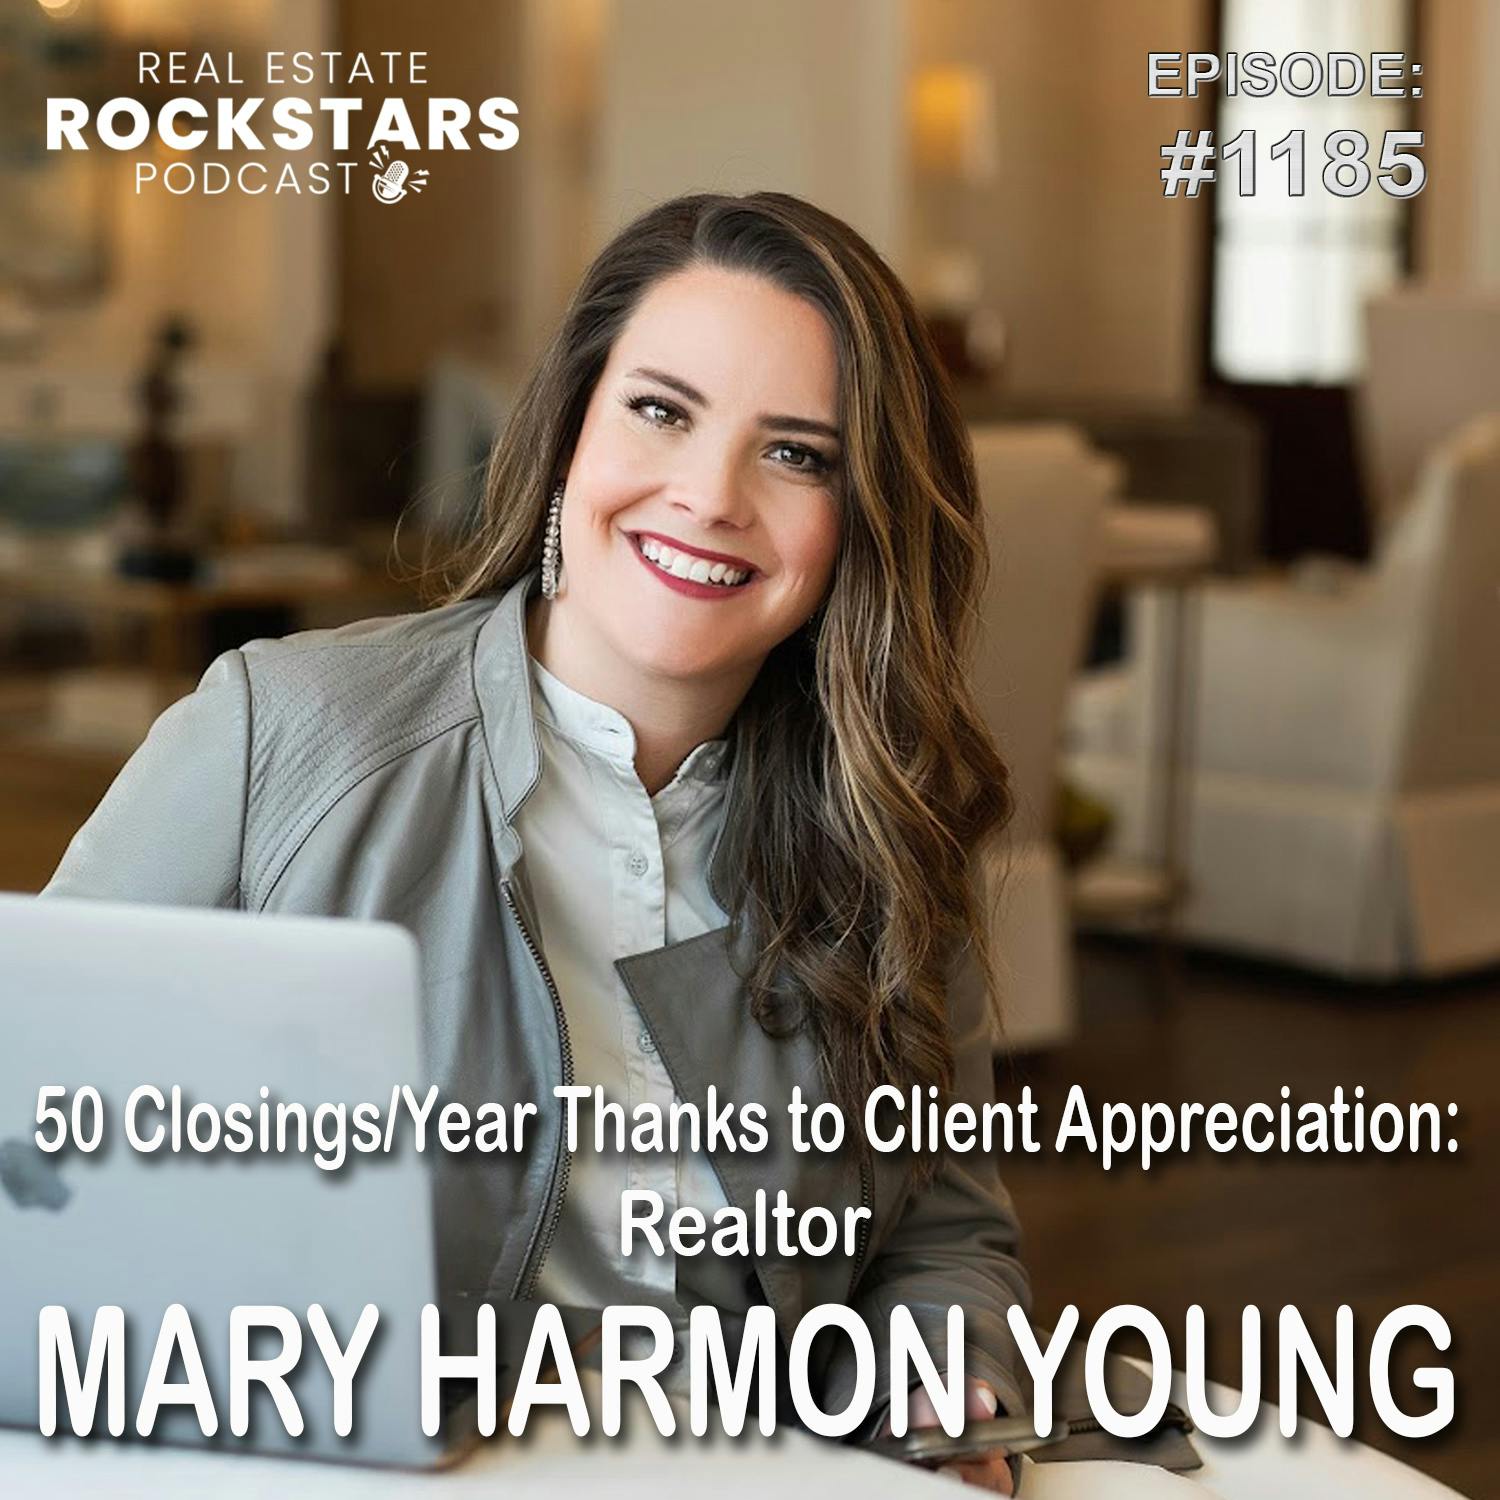 1185: 50 Closings/Year Thanks to Client Appreciation: Realtor Mary Harmon Young